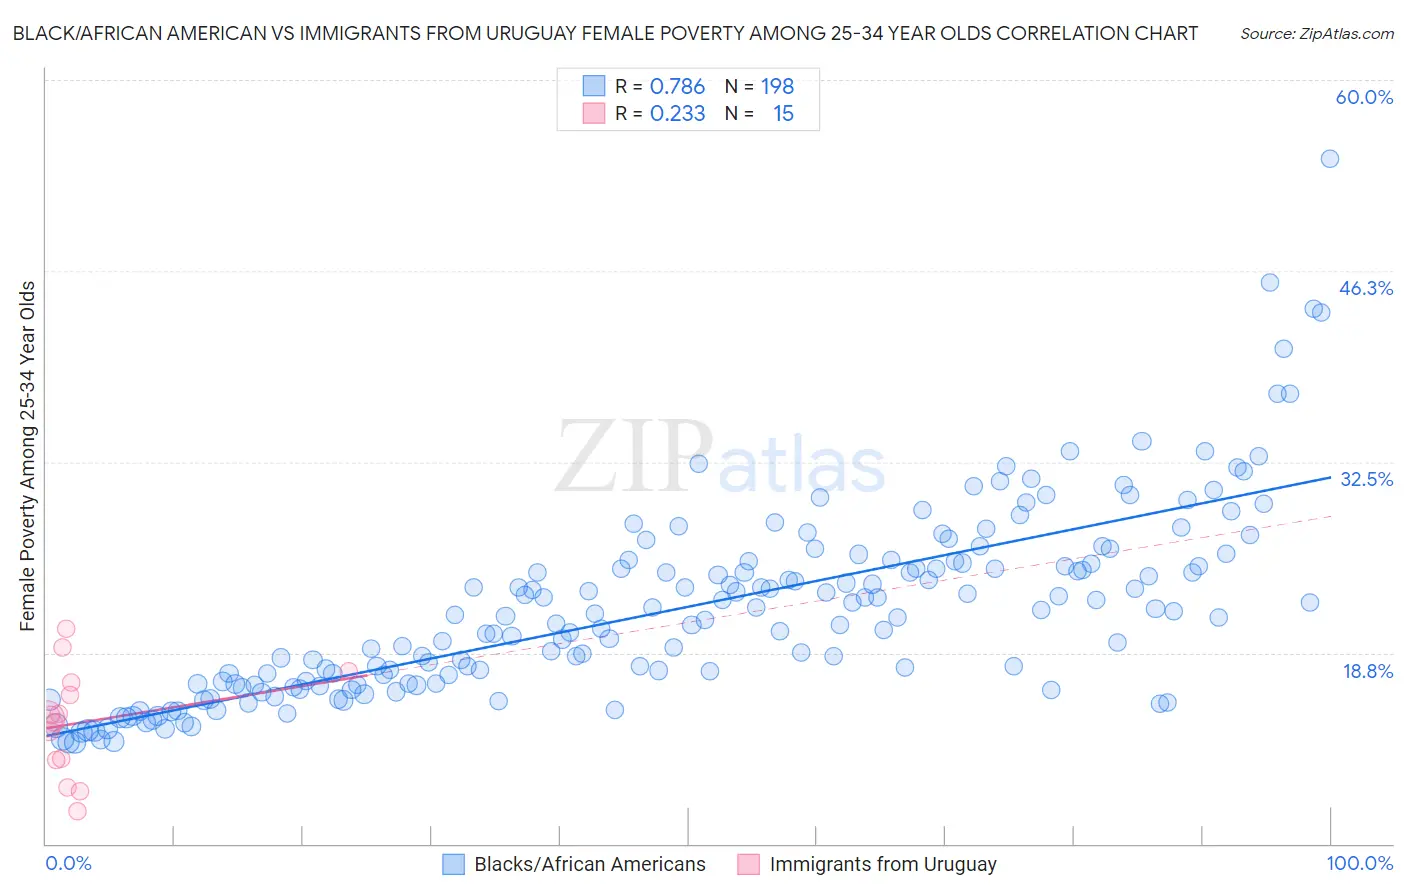 Black/African American vs Immigrants from Uruguay Female Poverty Among 25-34 Year Olds